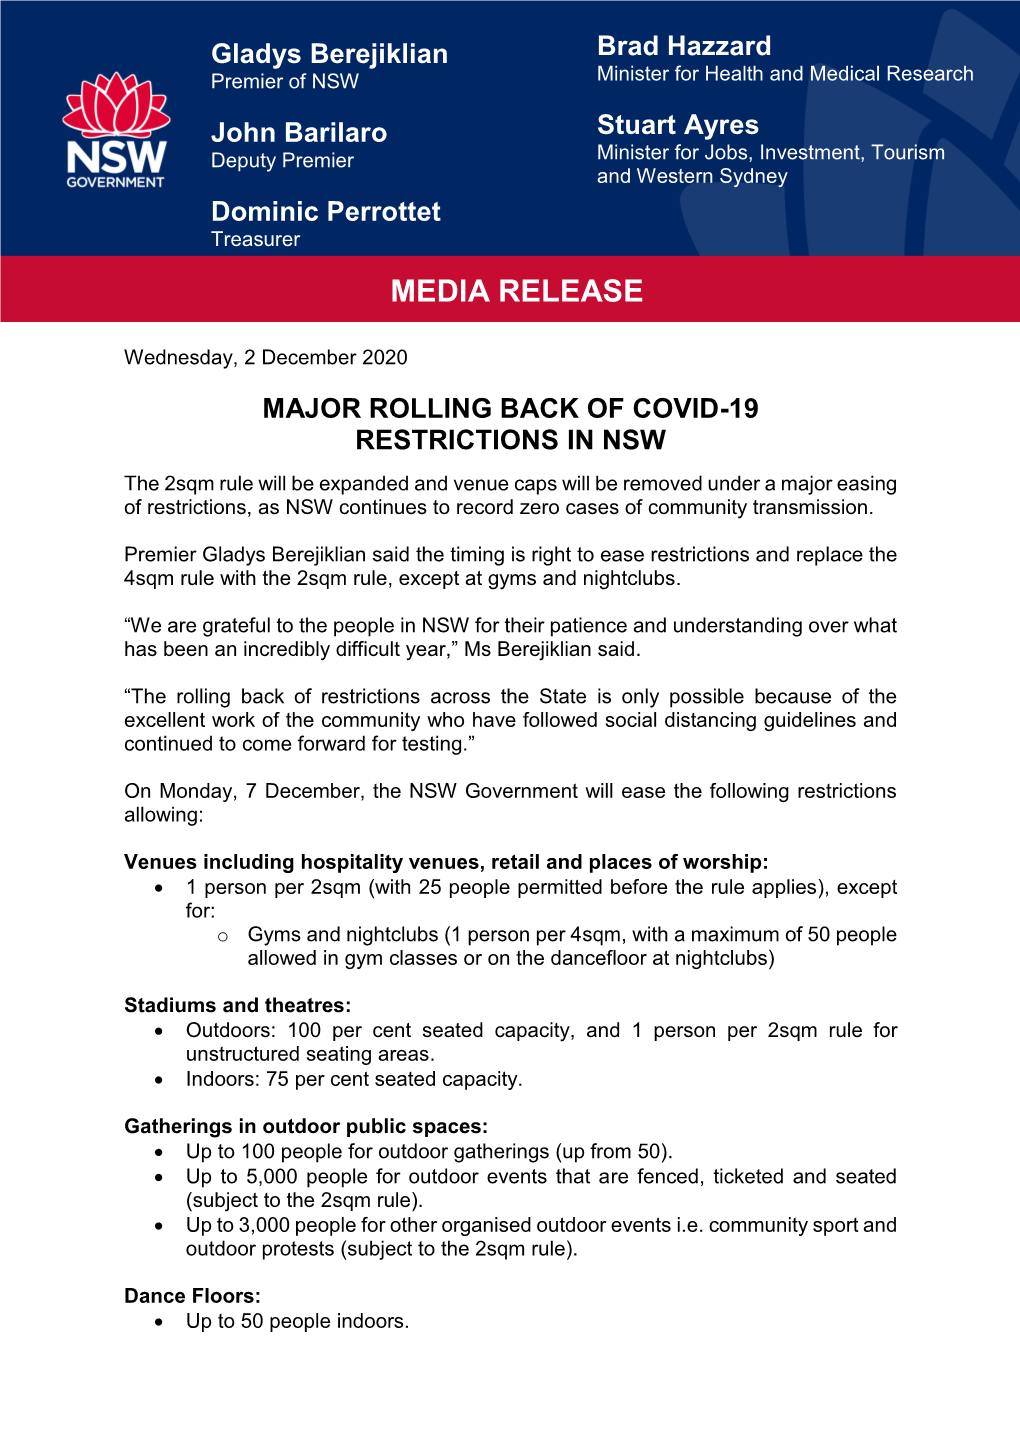 Major Rolling Back of Covid-19 Restrictions in Nsw